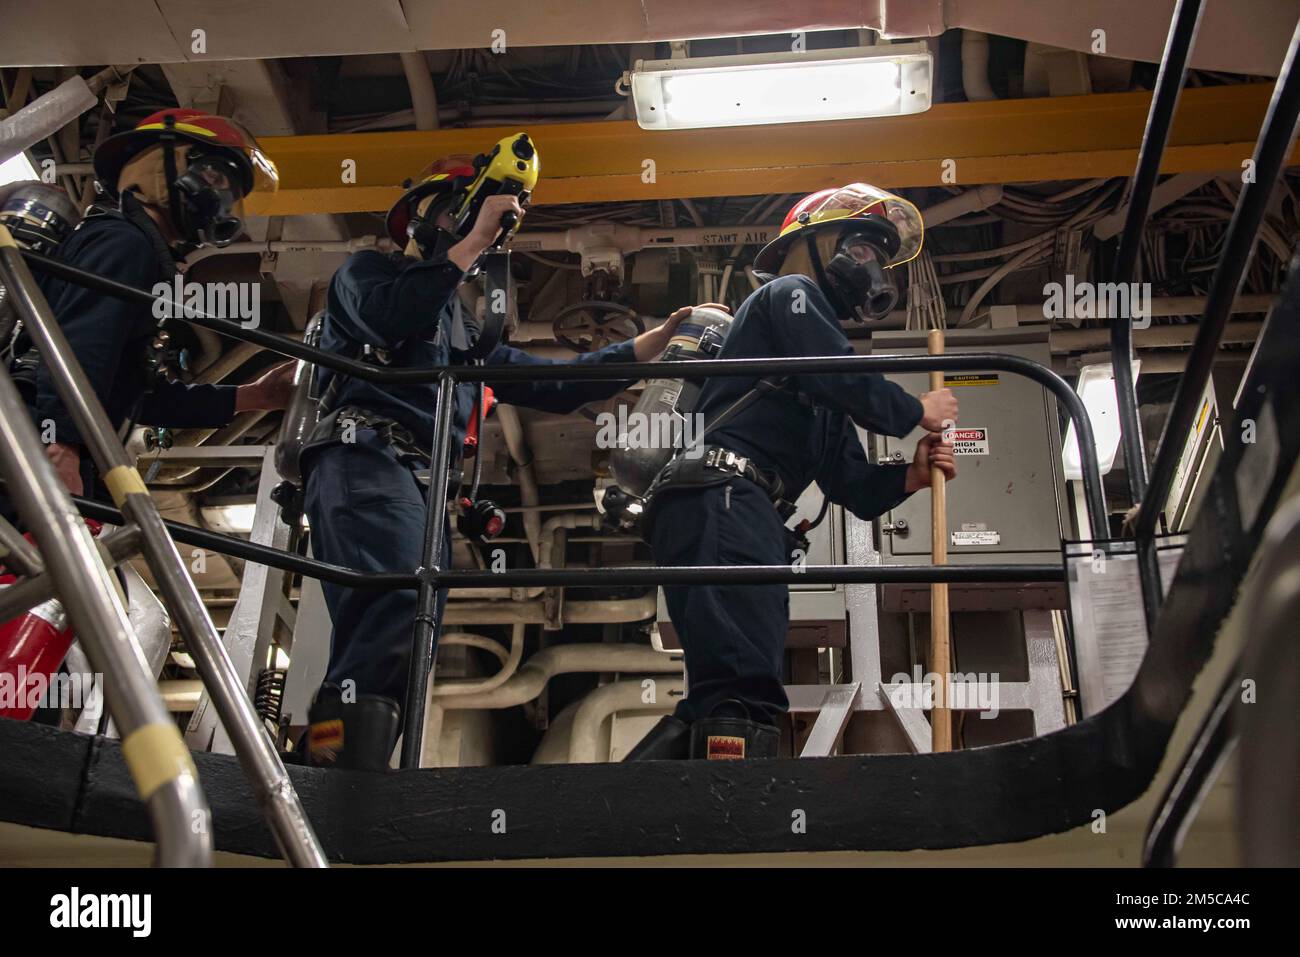 220228-N-XB010-1001 EAST CHINA SEA (Feb. 28, 2022) Sailors assigned to USS New Orleans (LPD 18) overhaul a space during a damage control training team evolution. New Orleans, part of the America Amphibious Ready Group, along with the 31st Marine Expeditionary Unit, is operating in the U.S. 7th Fleet area of responsibility to enhance interoperability with allies and partners and serve as a ready response force to defend peace and stability in the Indo-Pacific region. Stock Photo